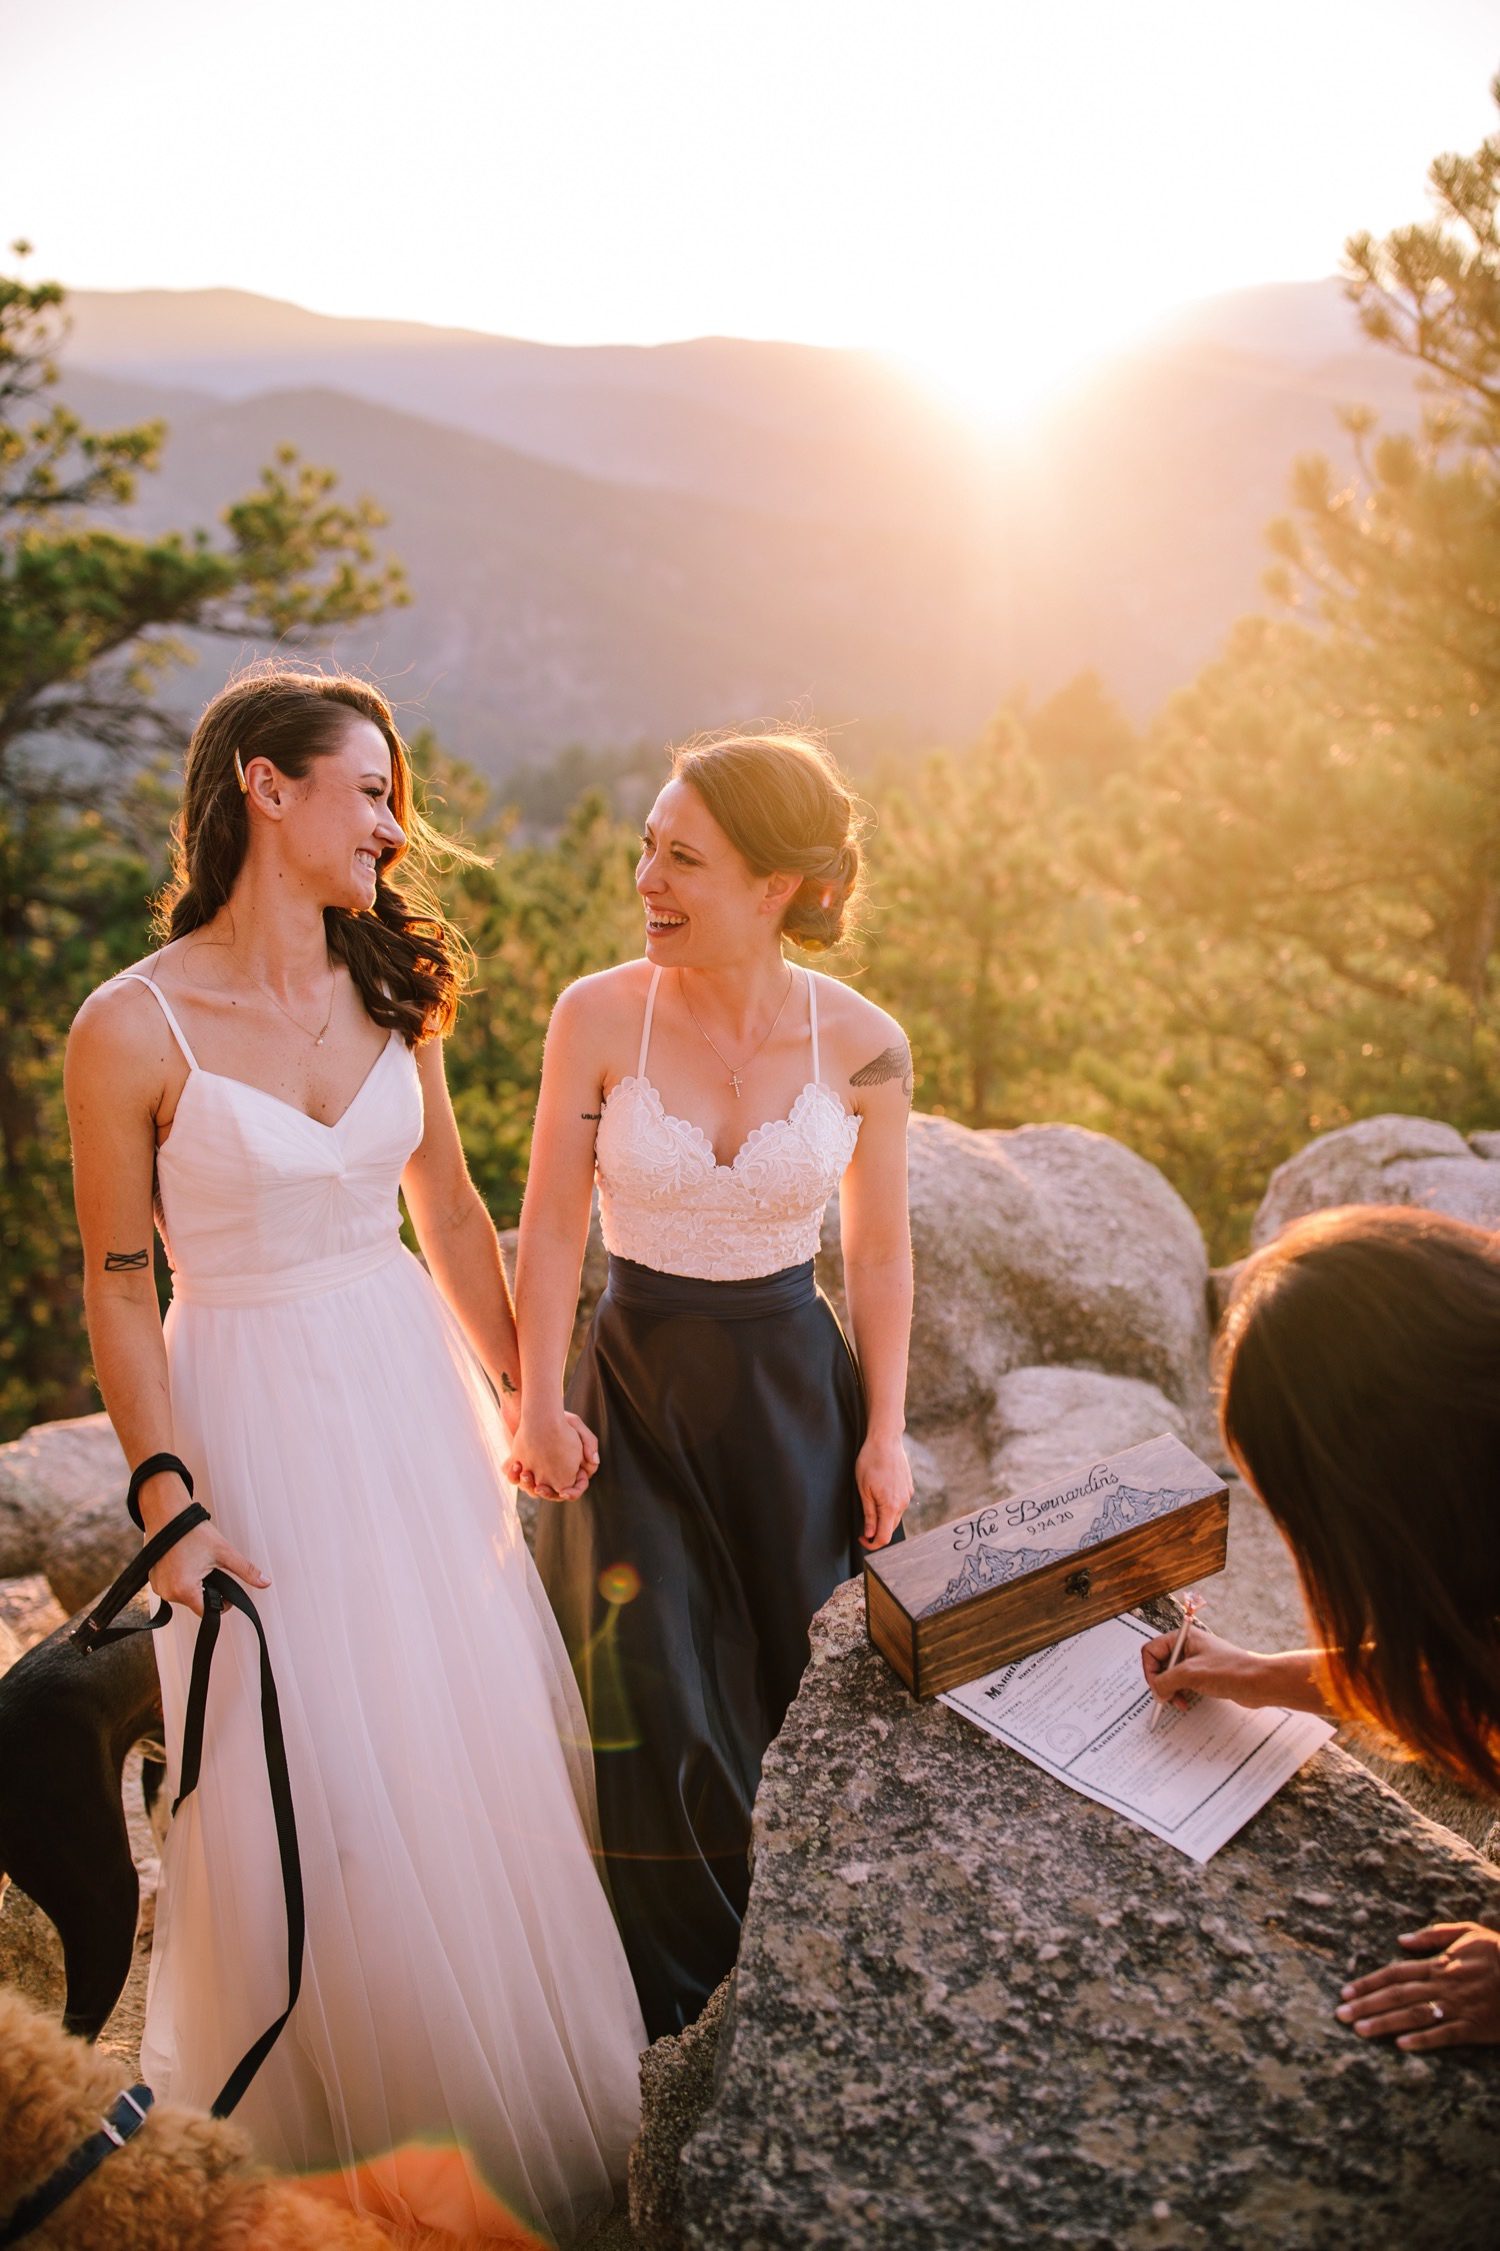 Boulder Colorado Elopement, Boulder Mountain Elopement, Flagstaff Mountain in Boulder, Colorado mountain elopement, Colorado elopement, Places to elope in Colorado, Mountain elopement, Hiking elopement, Elopement Photos, Elopement Ideas, Elopement inspiration, Elopement, Elopement planning, LGBT elopement, same sex elopement, lesbian elopement, Colorado LGBT Elopement Photographer, Colorado LGBT Wedding Photographer, Same sex wedding, Equally Wed, Love is love, Mrs and Mrs, Elopement with dogs